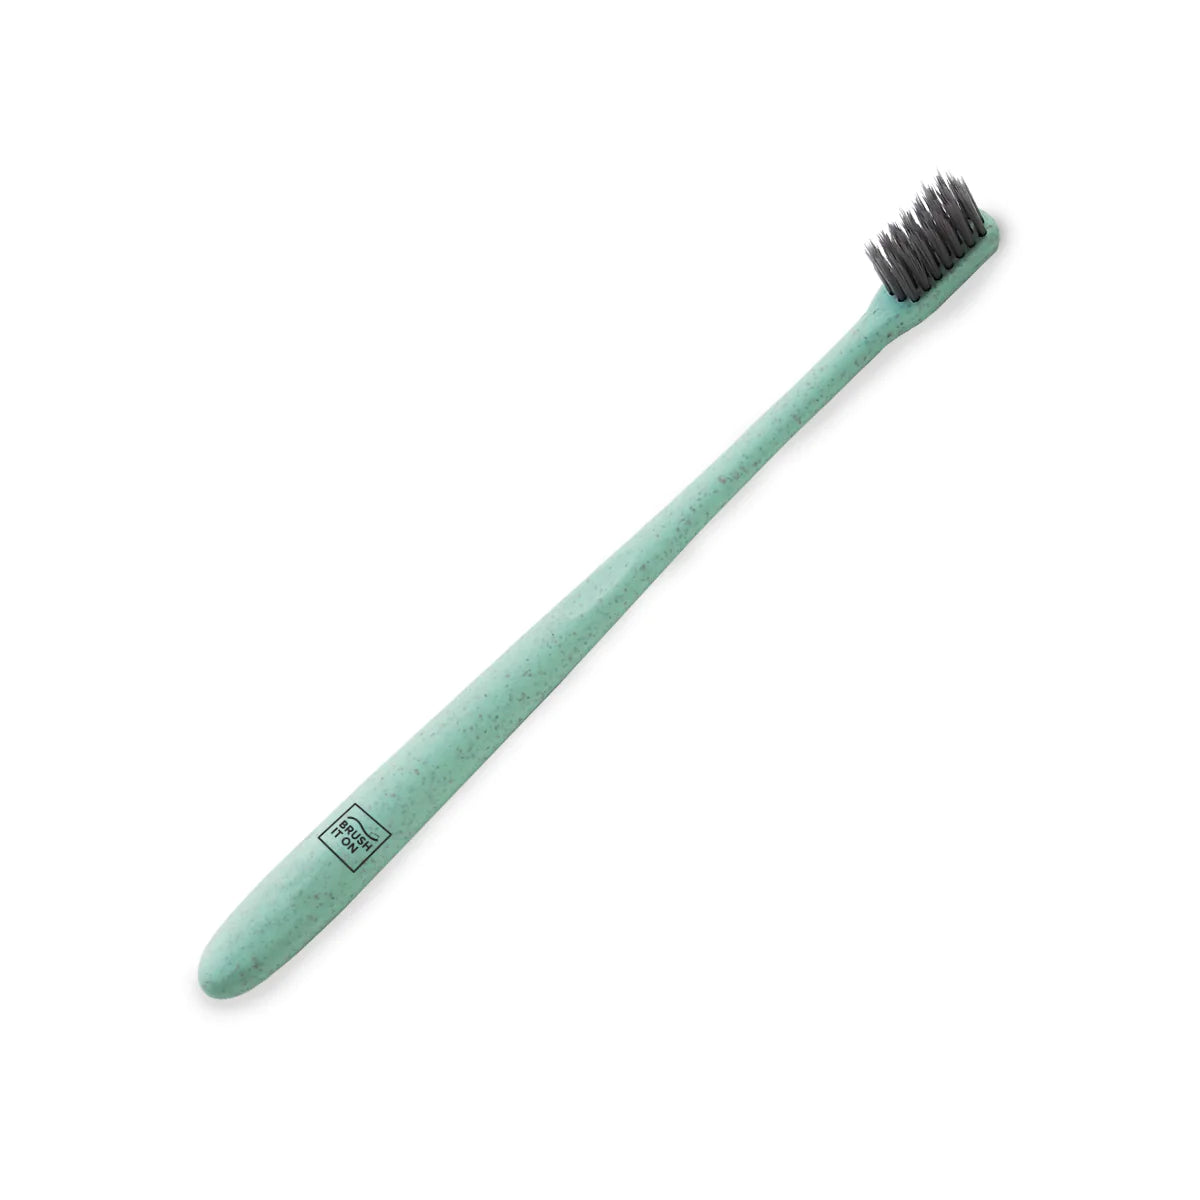 Brush It On Wheat Straw Toothbrush, Soft Bristles & Charcoal Infused